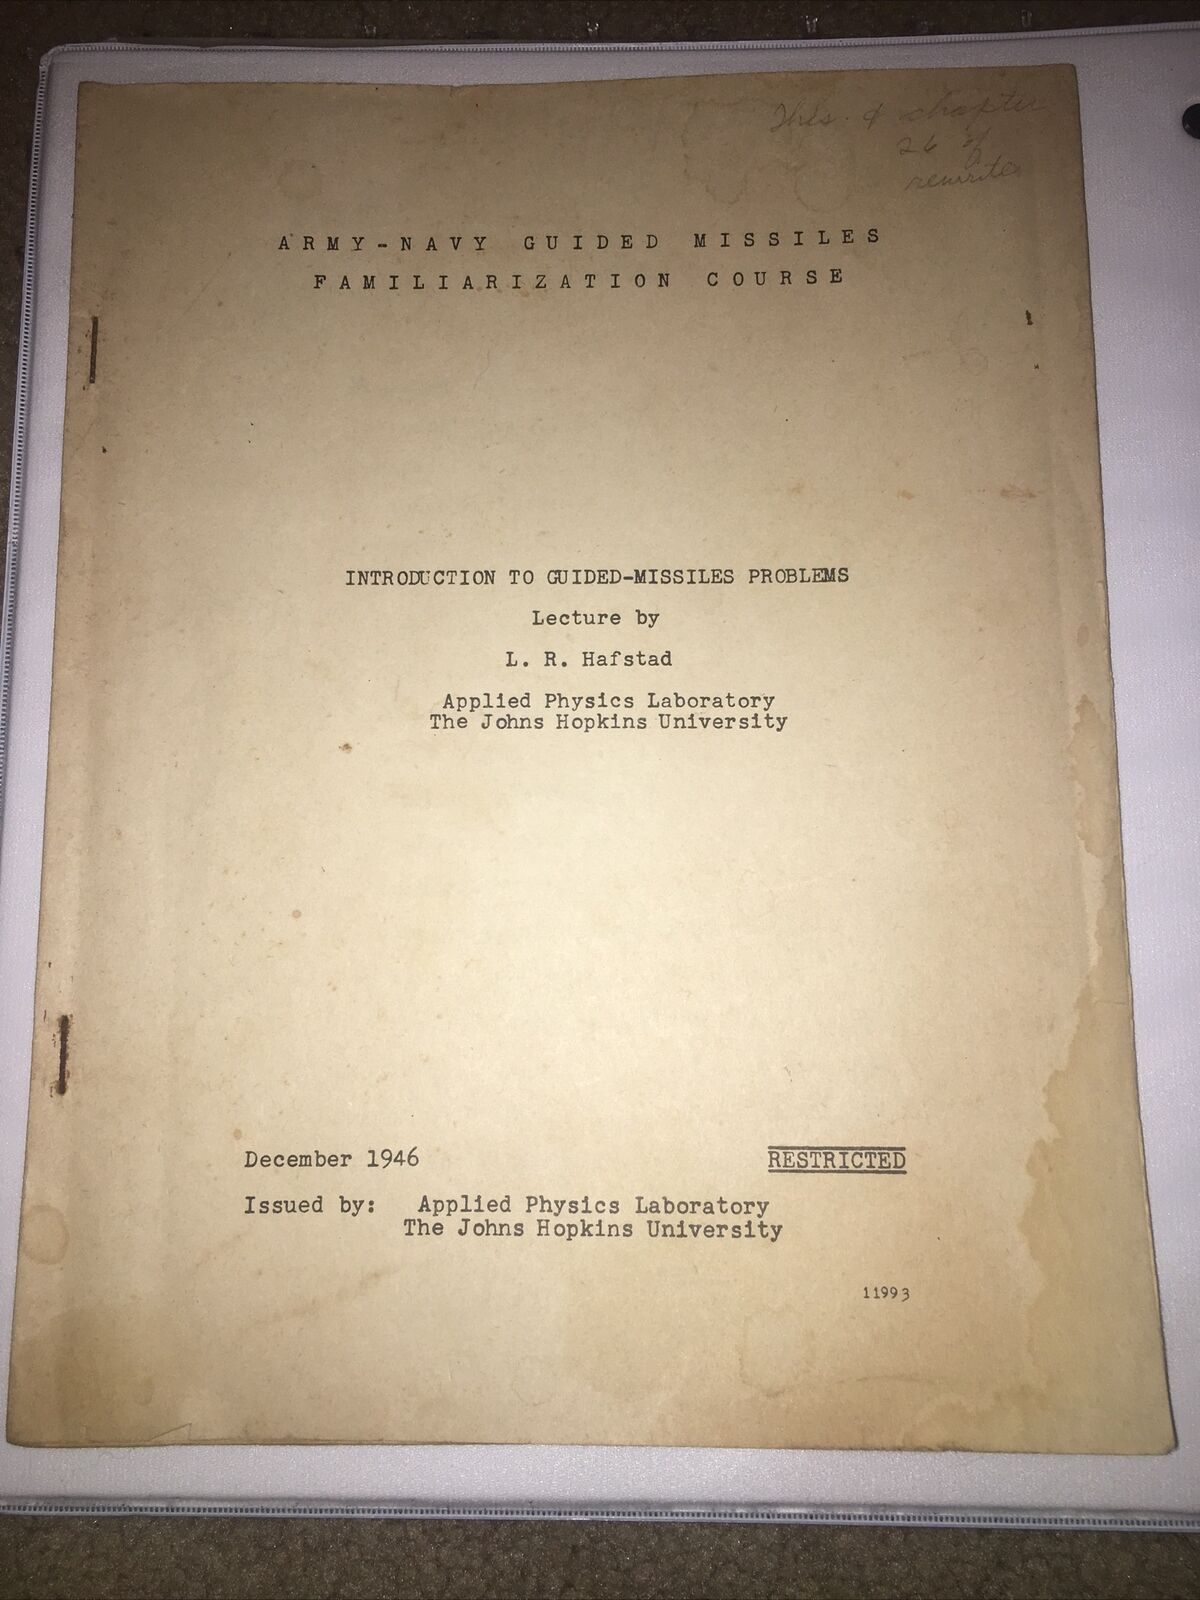 1946 Army-Navy Guided Missiles Familiarization Course *RARE*